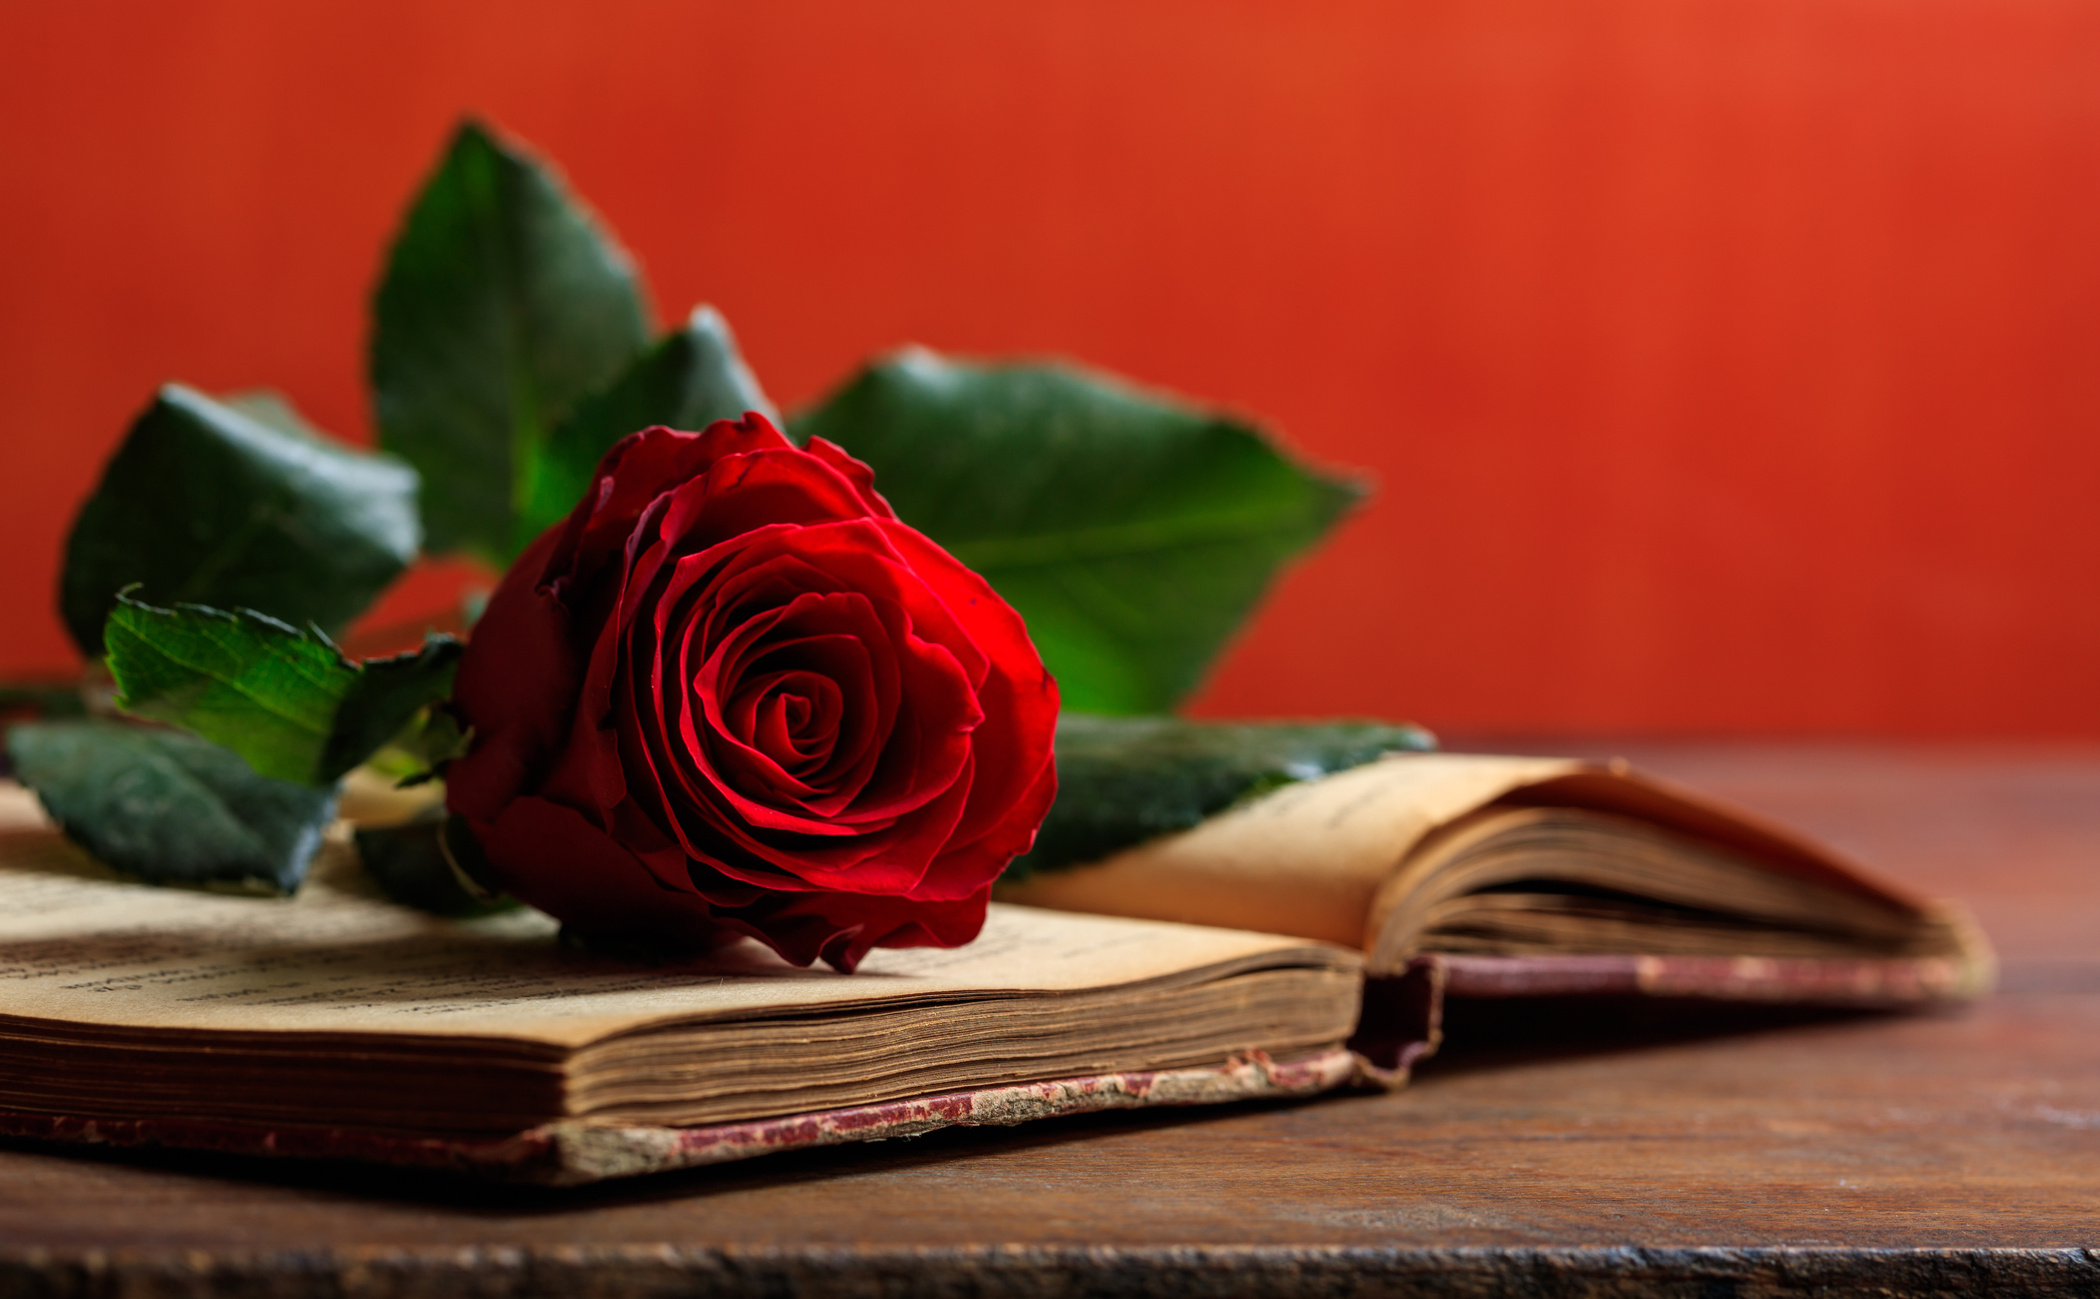 Vintage book and rose